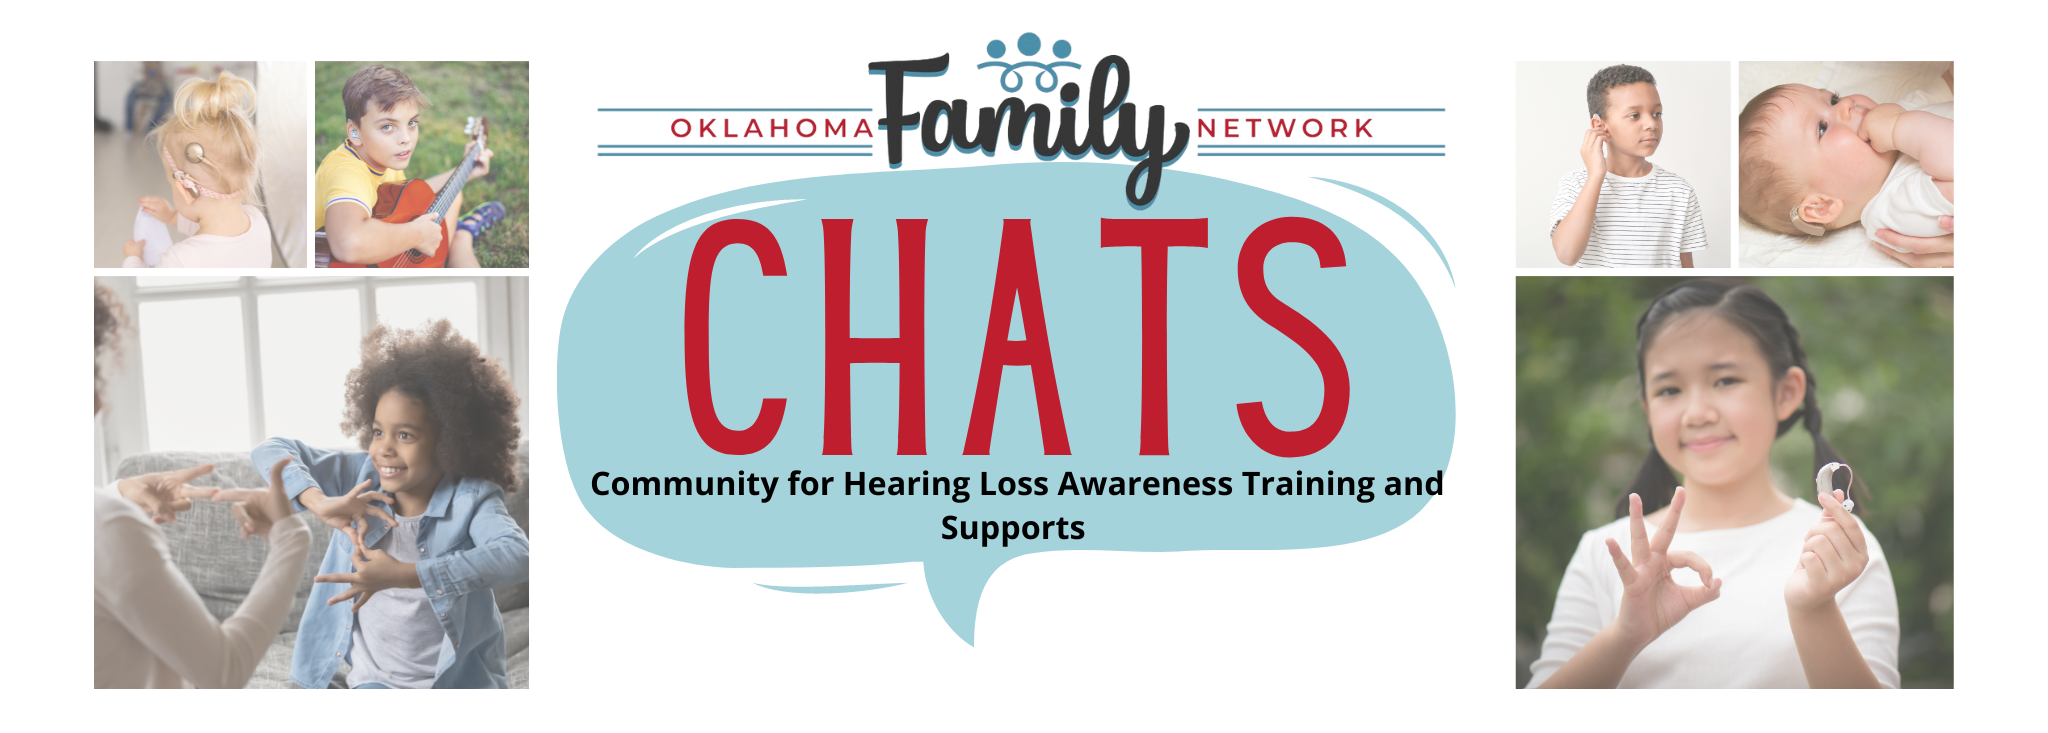 CHATS Community for Hearing Loss Awareness Training and Supports